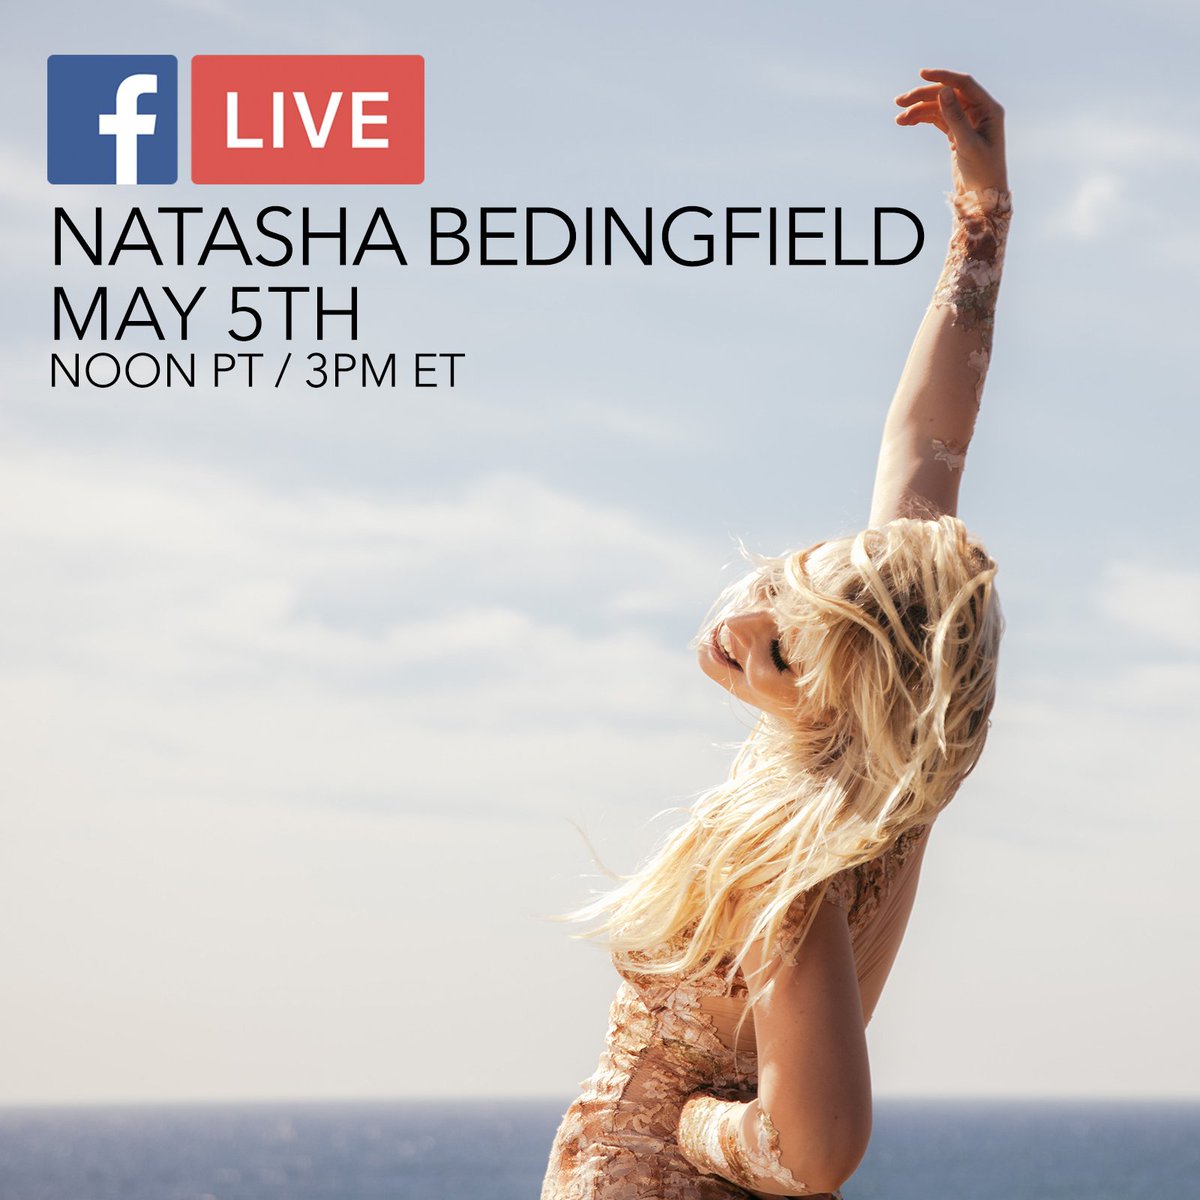 Join me tomorrow for a Facebook Live chat! #AskNatashaB https://t.co/rGYK12KgbC